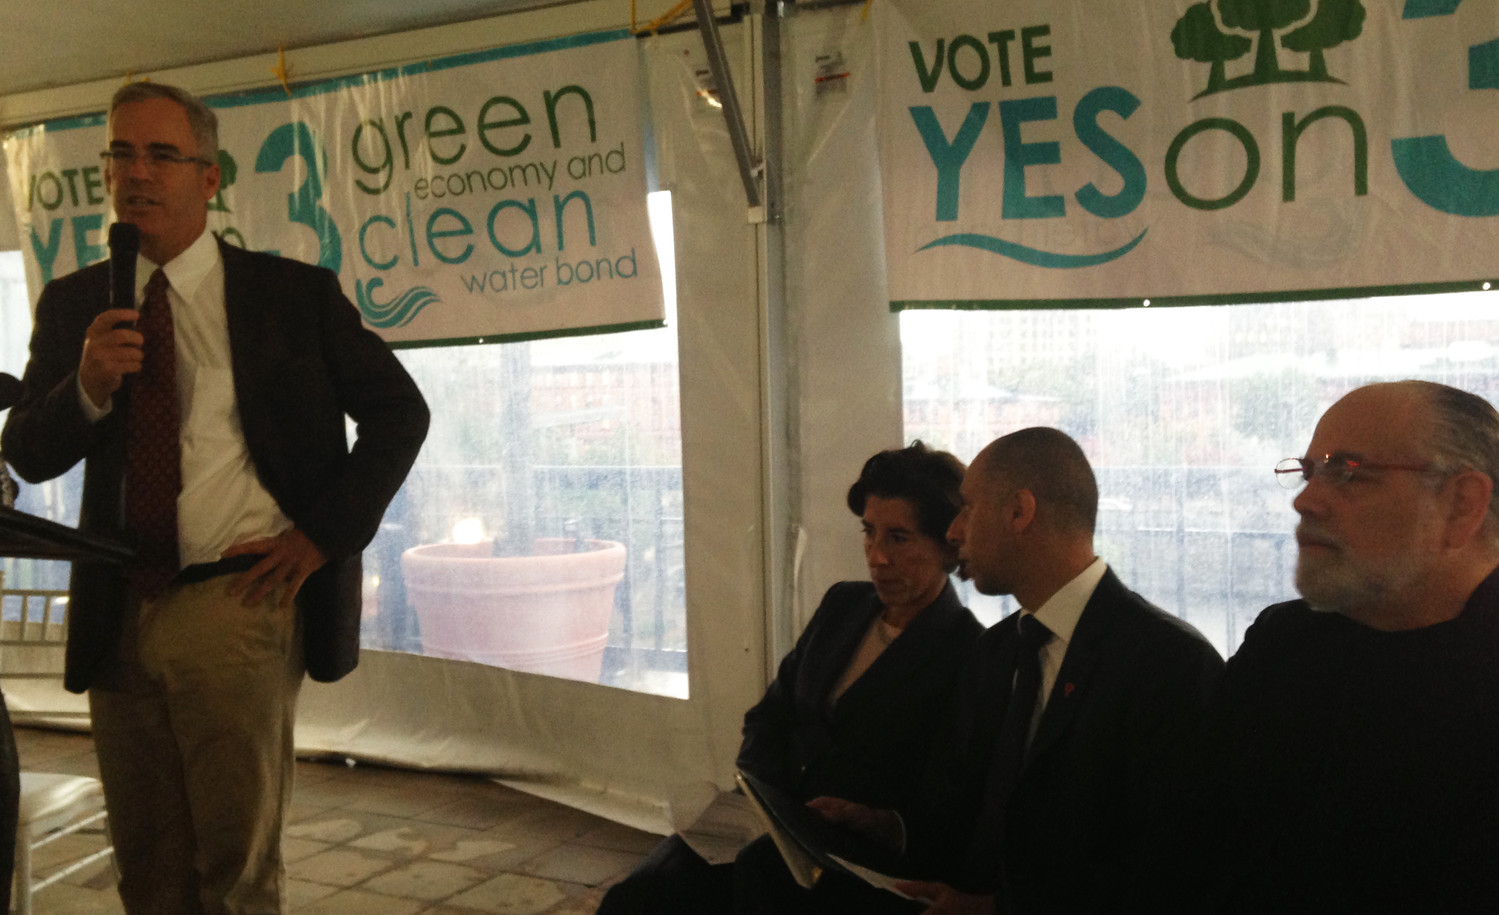 Jonathan Stone, left, executive director of Save The Bay, kicks off the Yes on 3 campaign on Friday, Oct. 12, including comments by Gov. Gina Raimondo, second from left, Providence Mayor Jorge Elorza, third from left, and Barnaby Evans, the creative director of WaterFire.